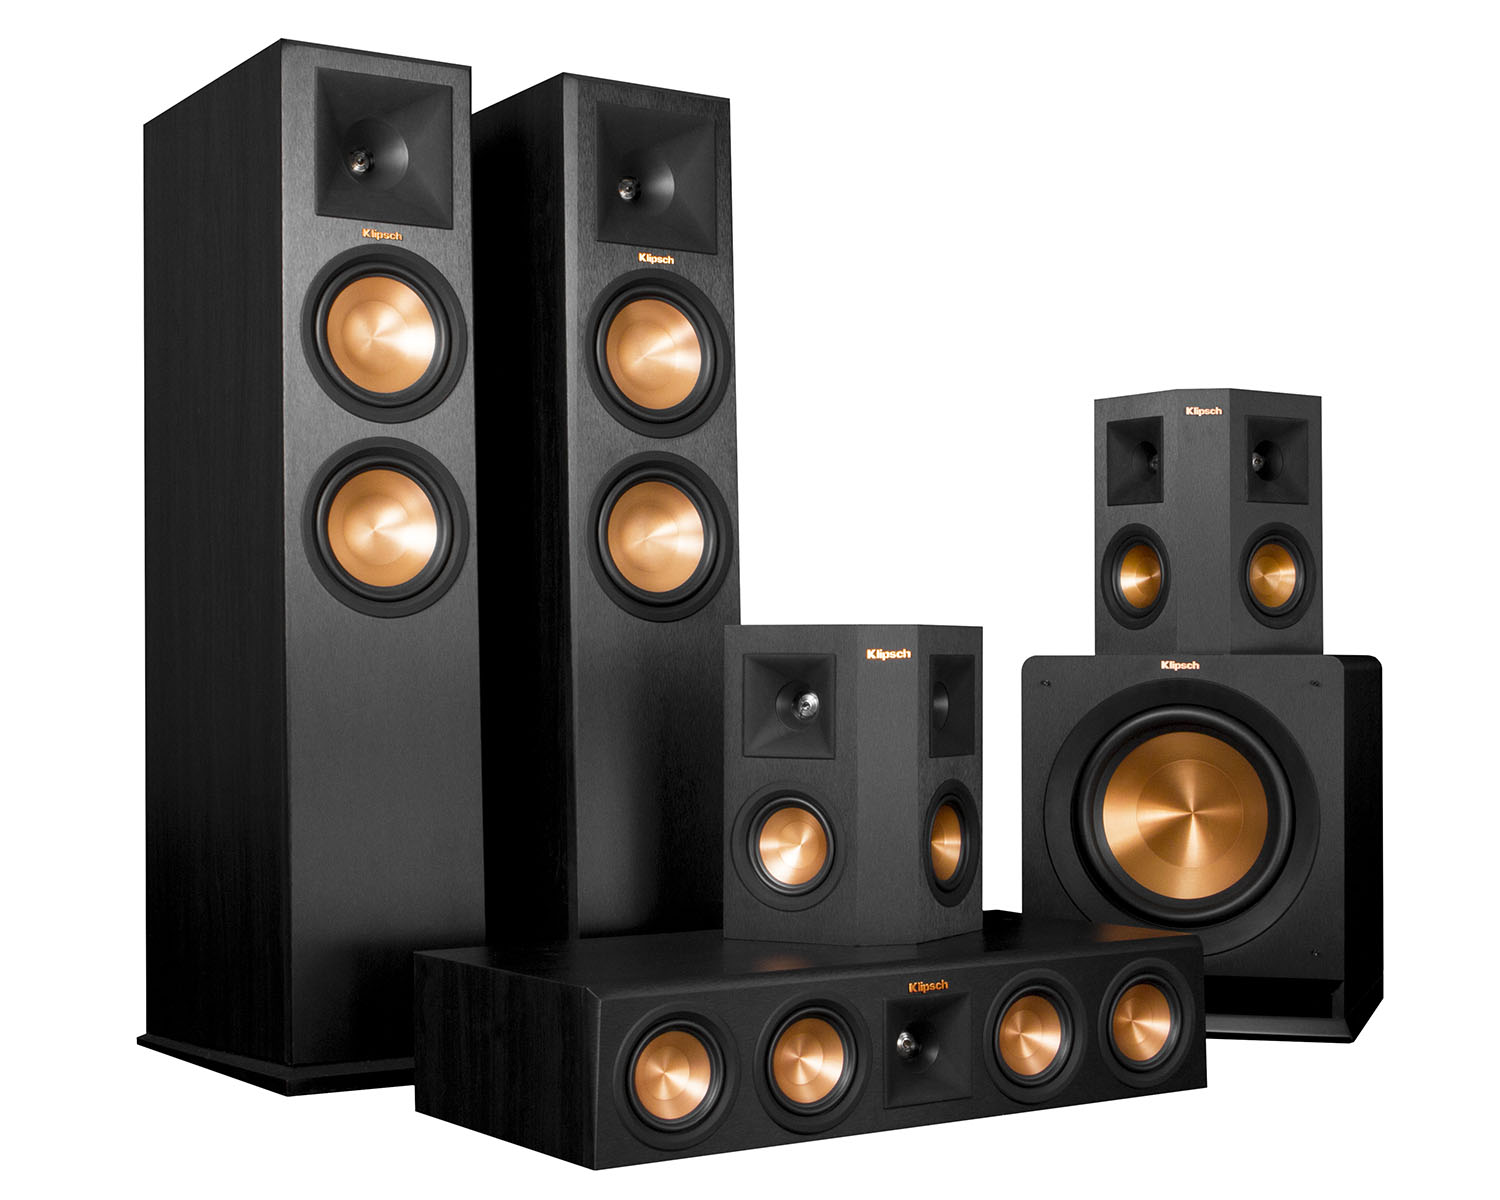 ces unveiled nyc lo mas nuevo 7reference premiere